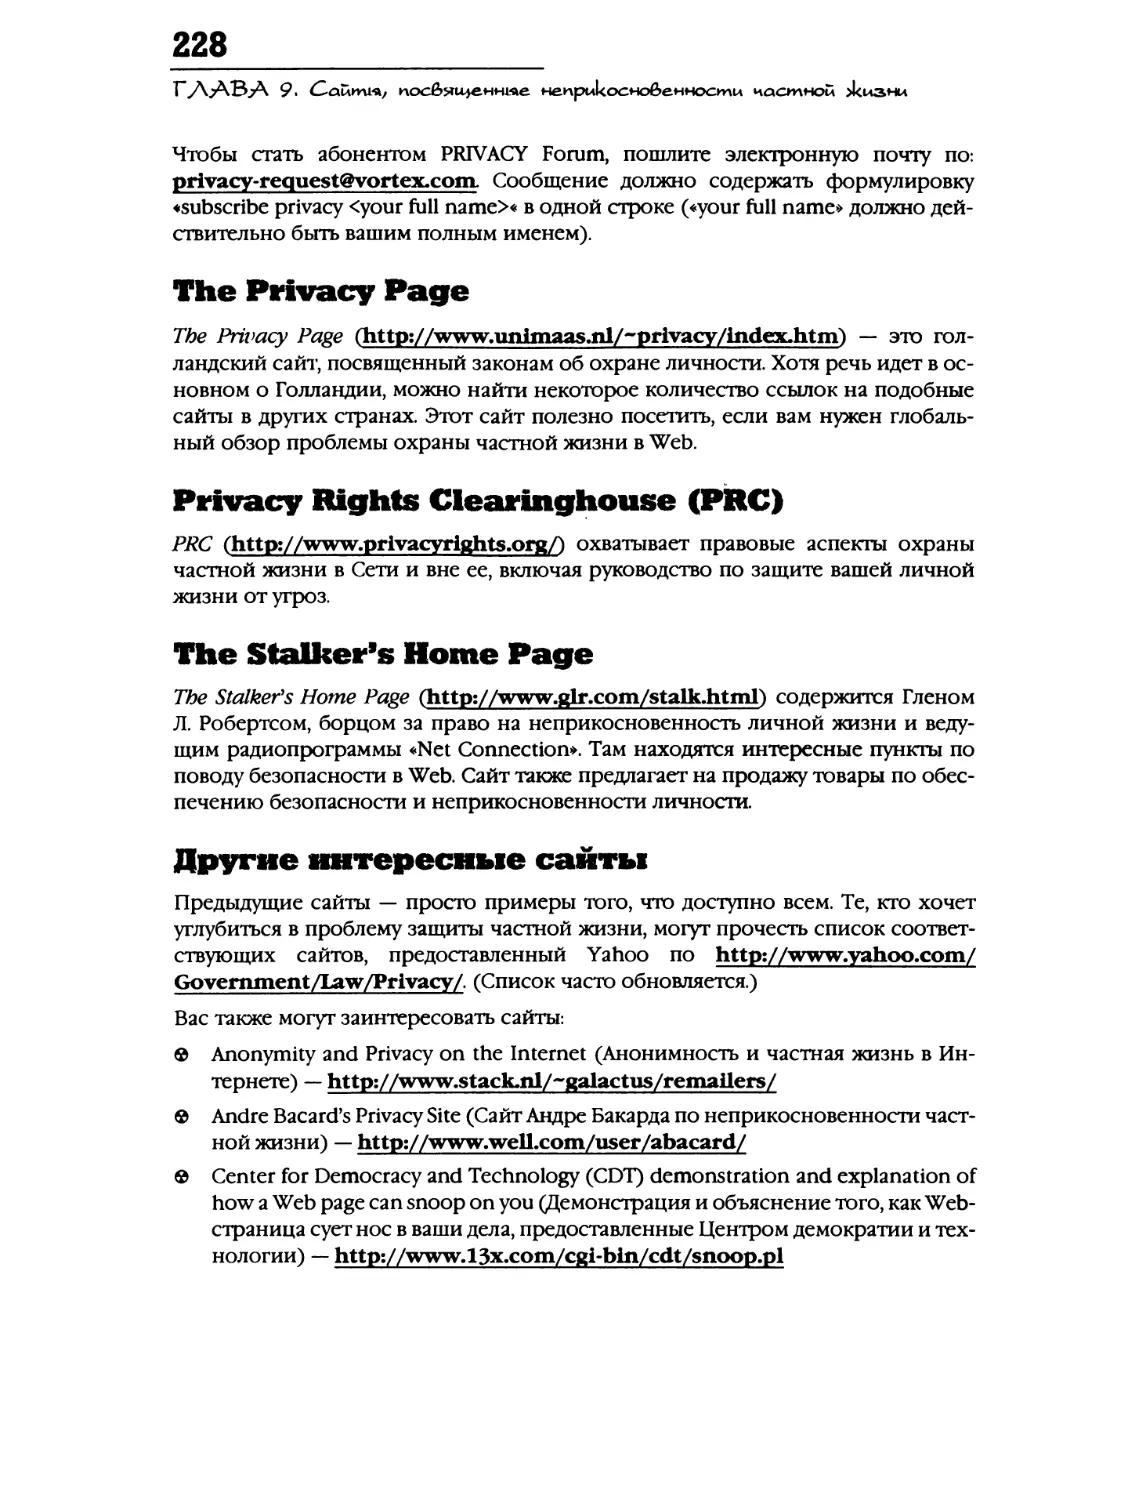 The Privacy Page
The Stalker's Home Page
Другие интересные сайты